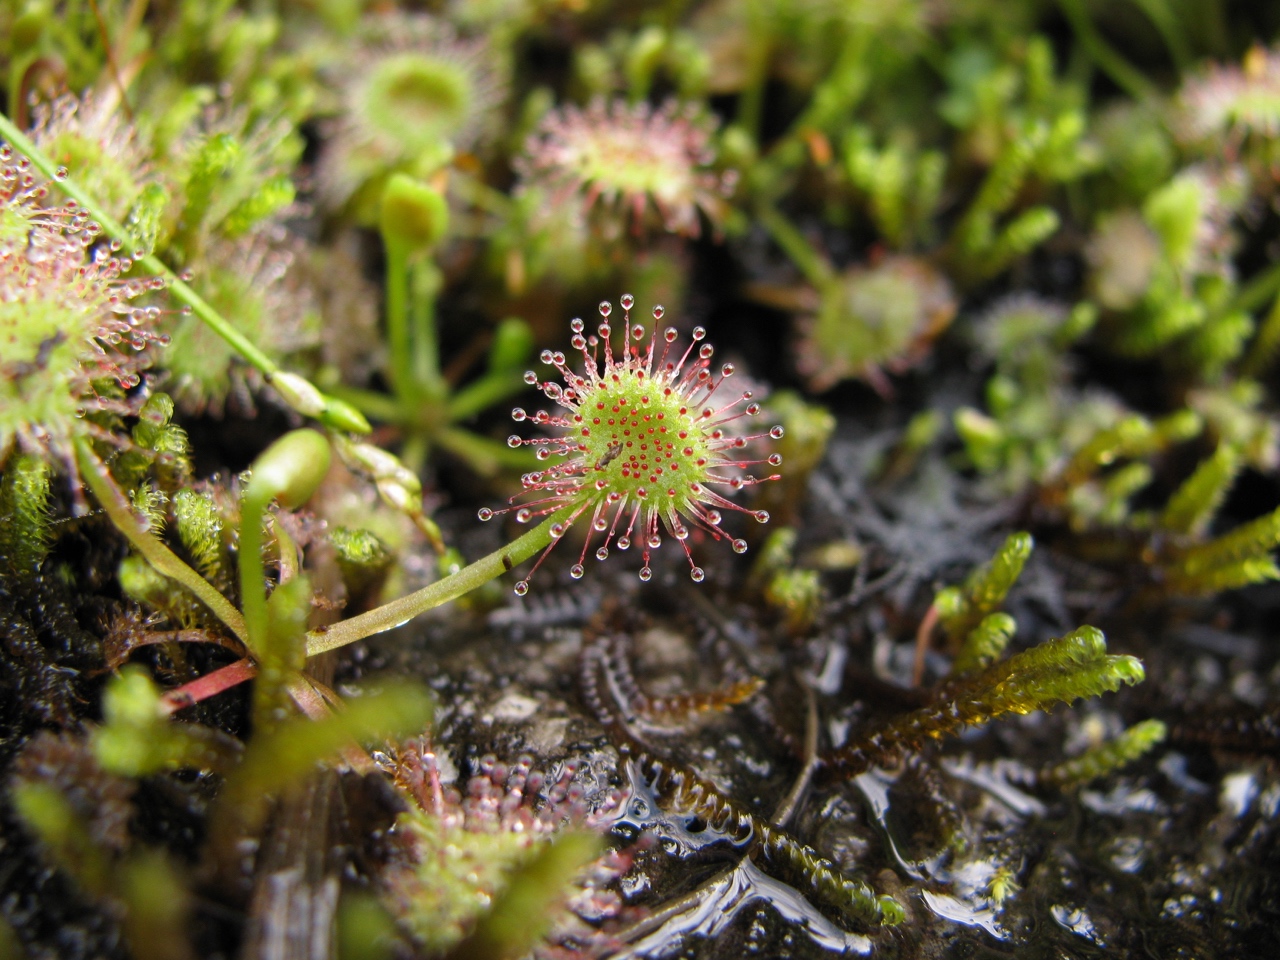 The Scientific Name is Drosera rotundifolia. You will likely hear them called Roundleaf Sundew. This picture shows the Close-up of leaf covered in glandular hairs of Drosera rotundifolia